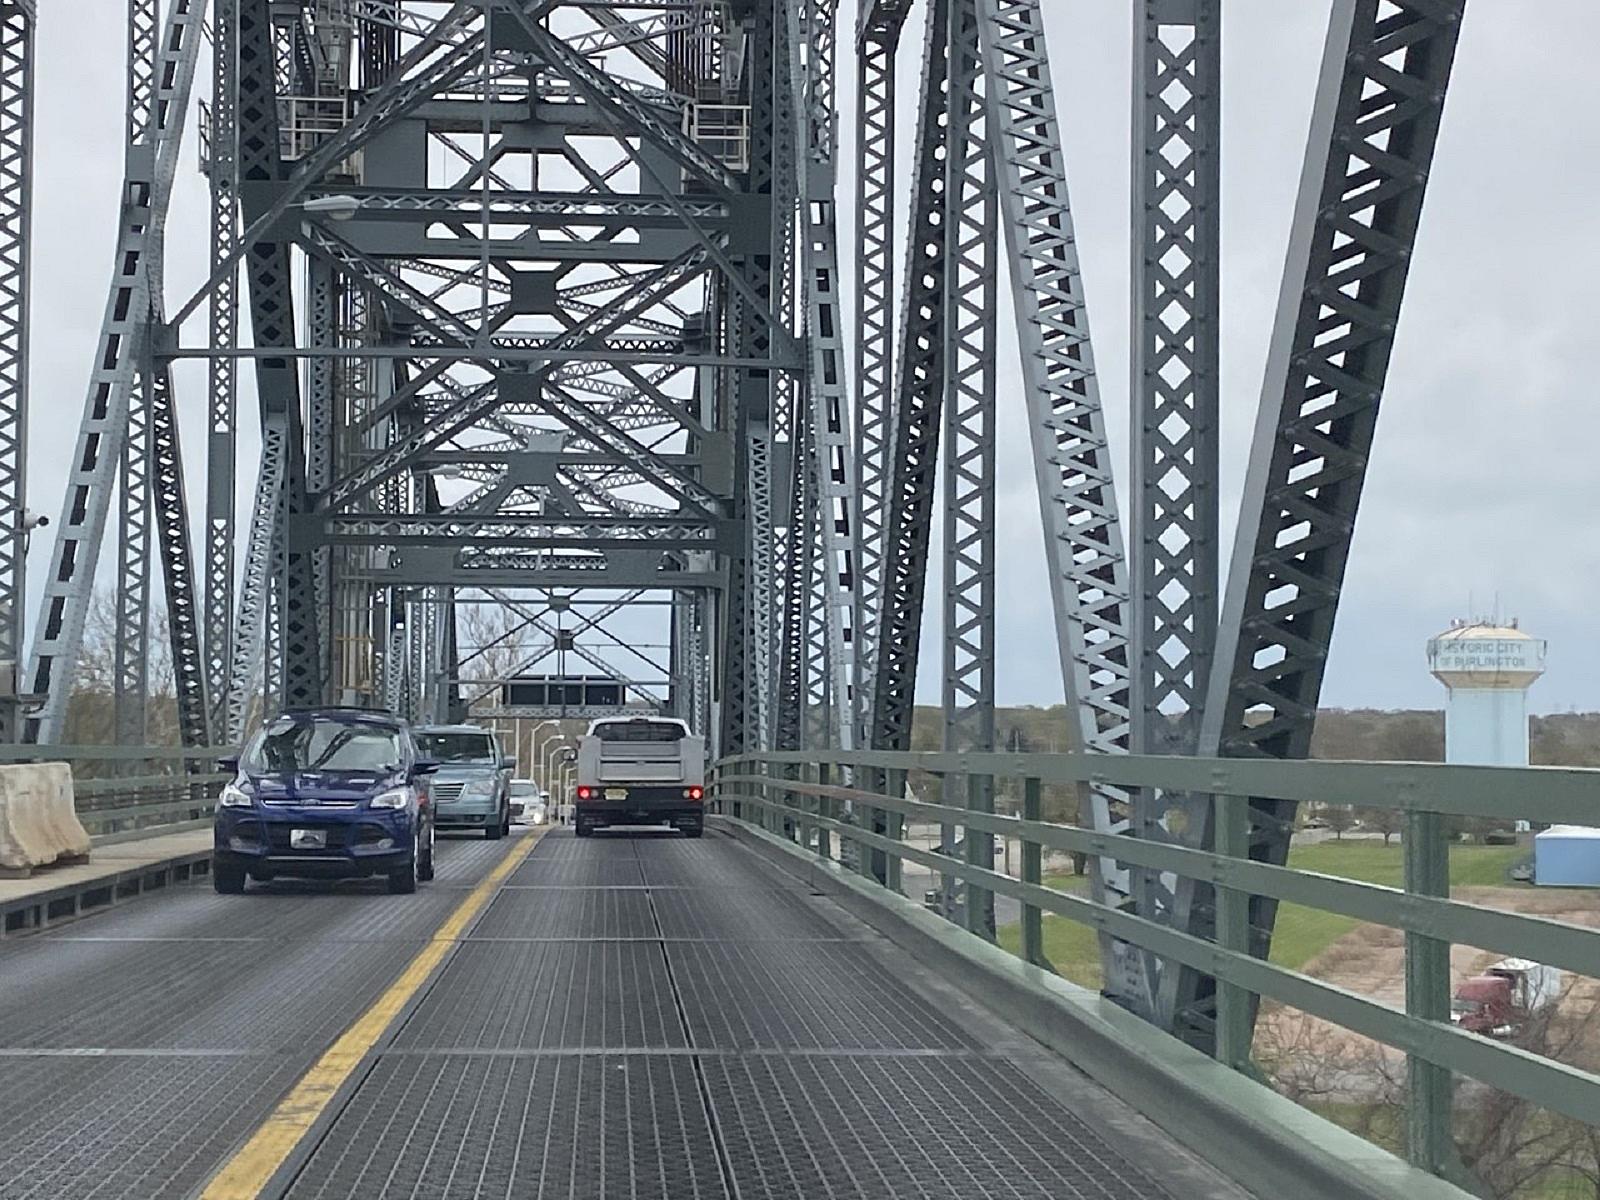 This is New Jersey's scariest bridge